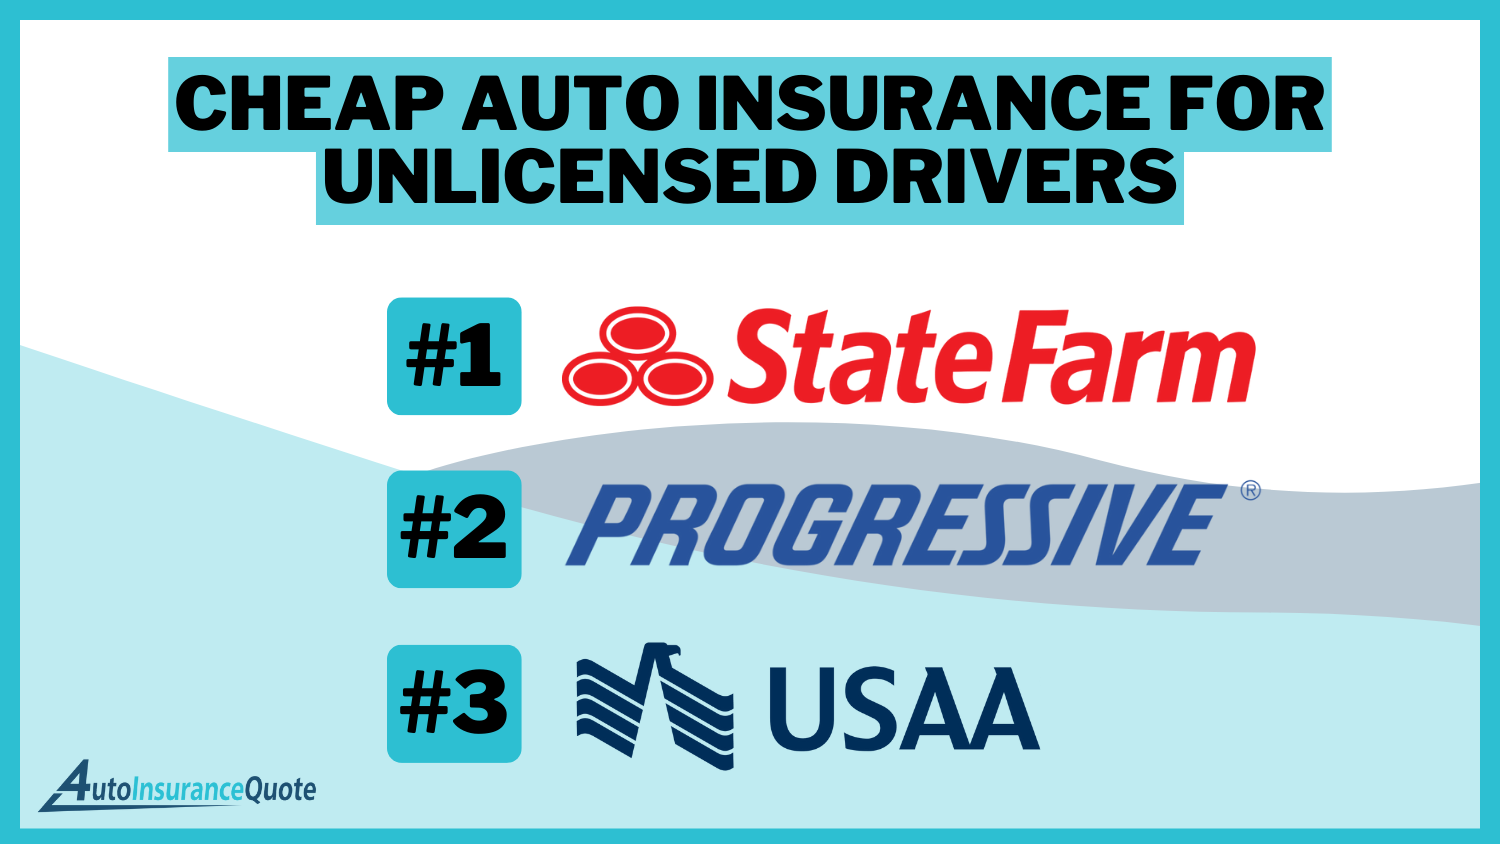 Cheap Auto Insurance for Unlicensed Drivers: State Farm, Progressive, and USAA